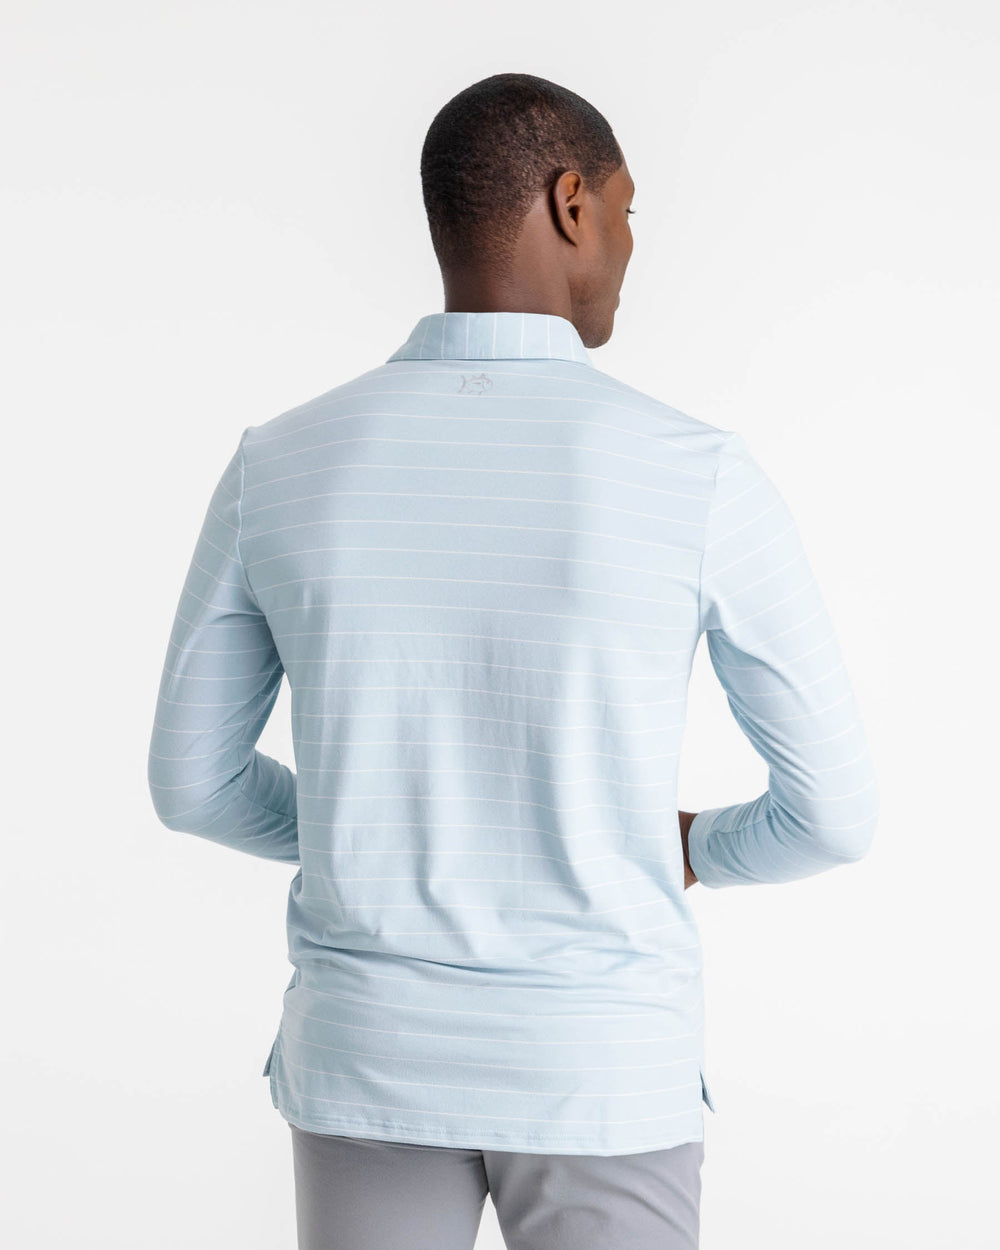 The back view of the Ryder Bartlett Stripe Performance Polo Shirt by Southern Tide - Heather Aquamarine